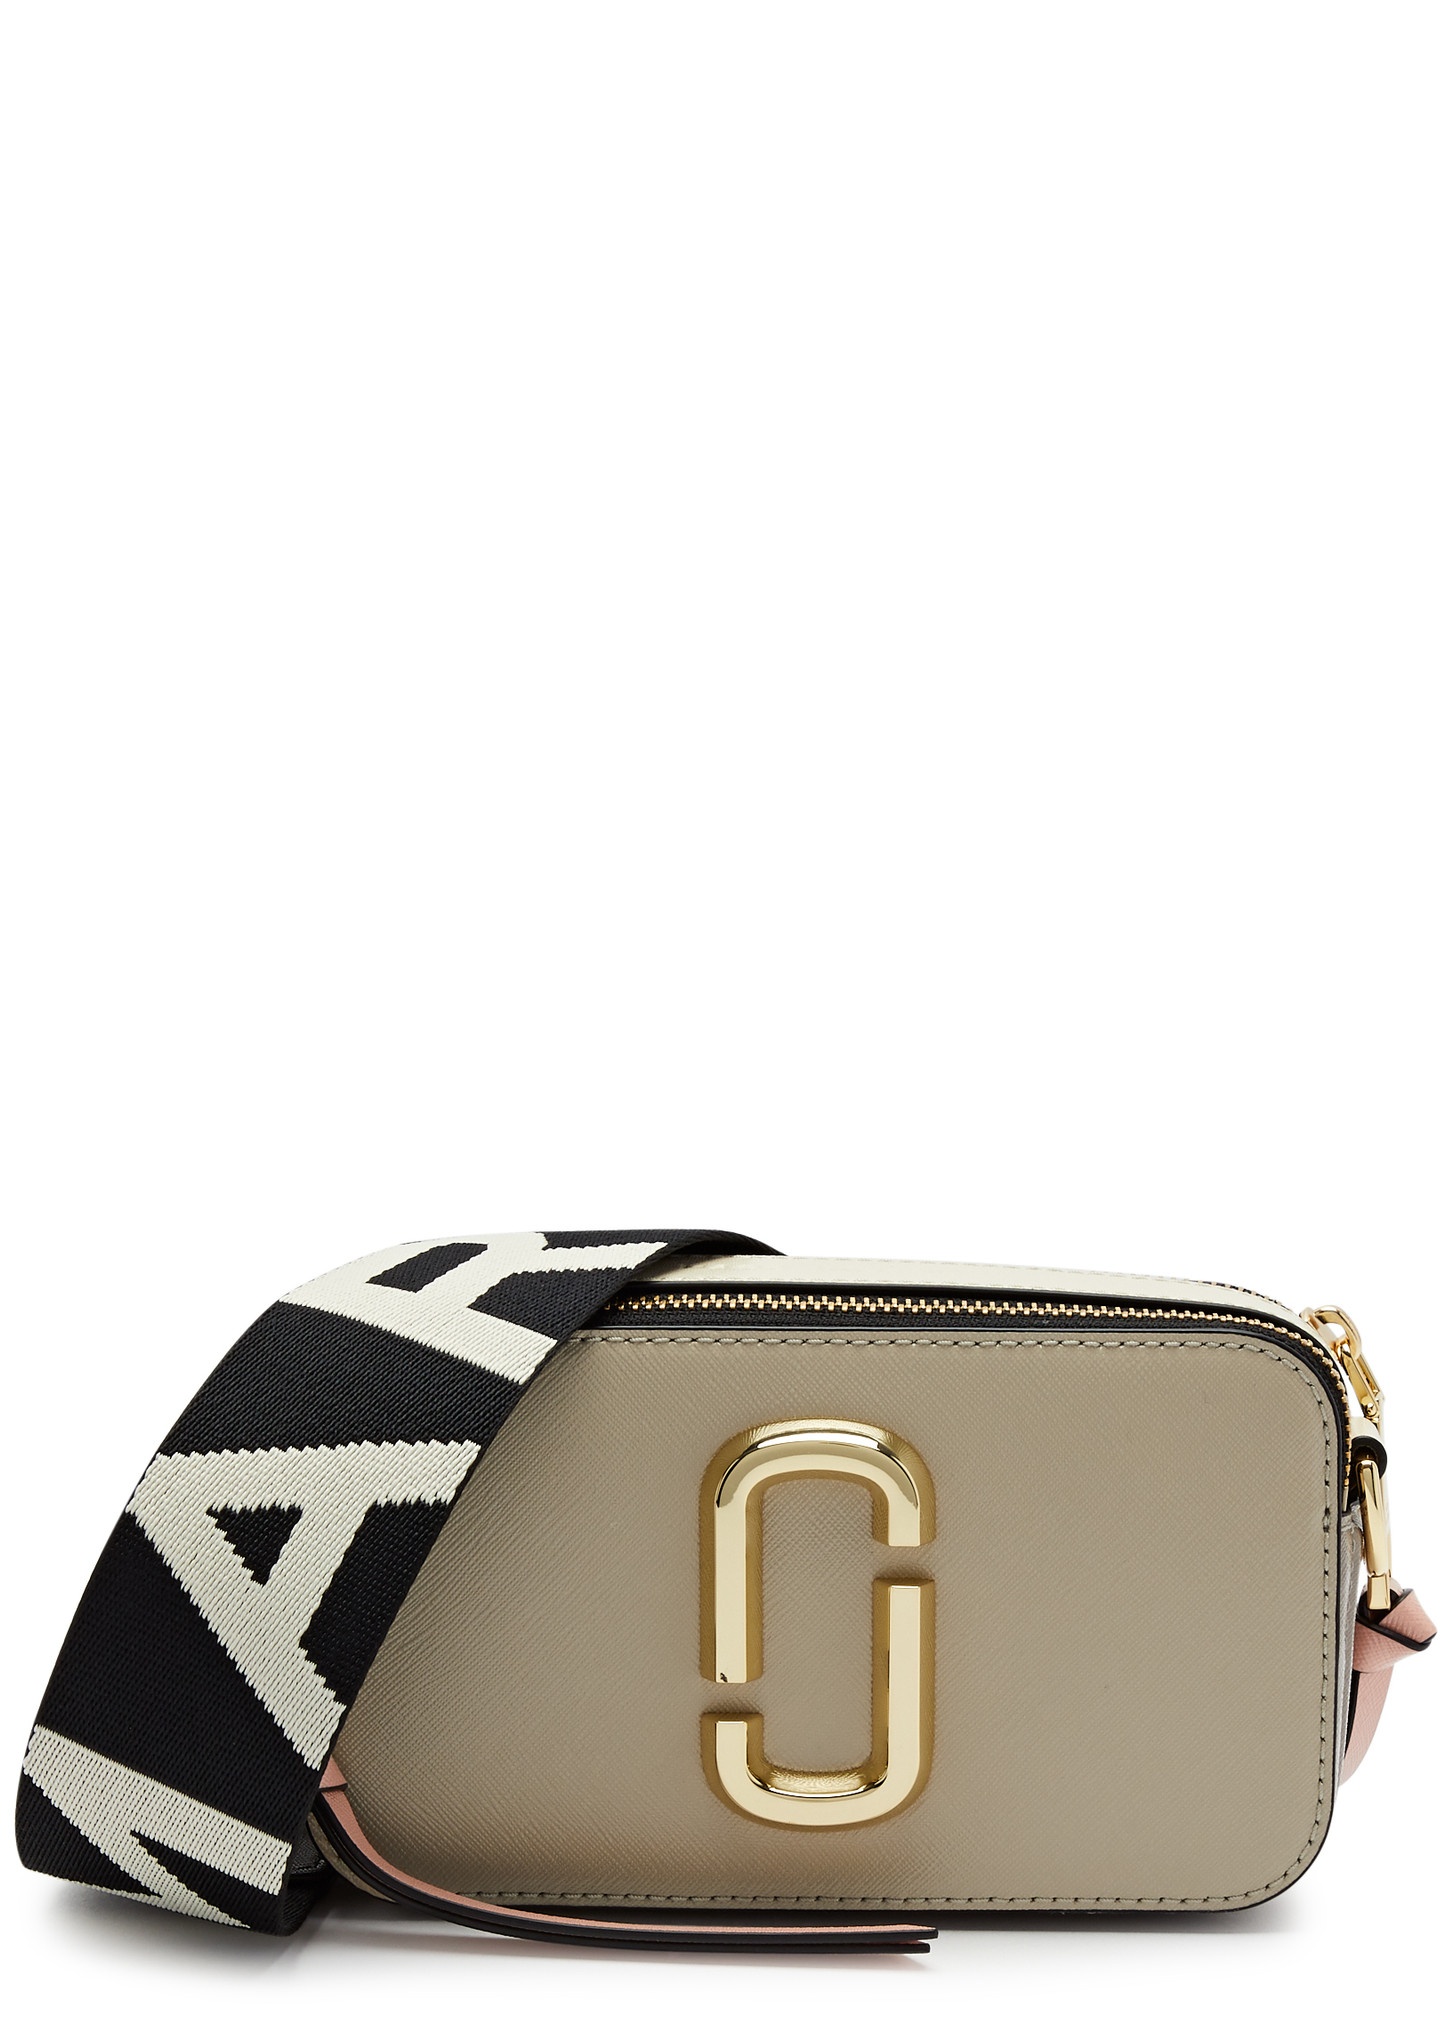 The Snapshot Core leather cross-body bag - 1